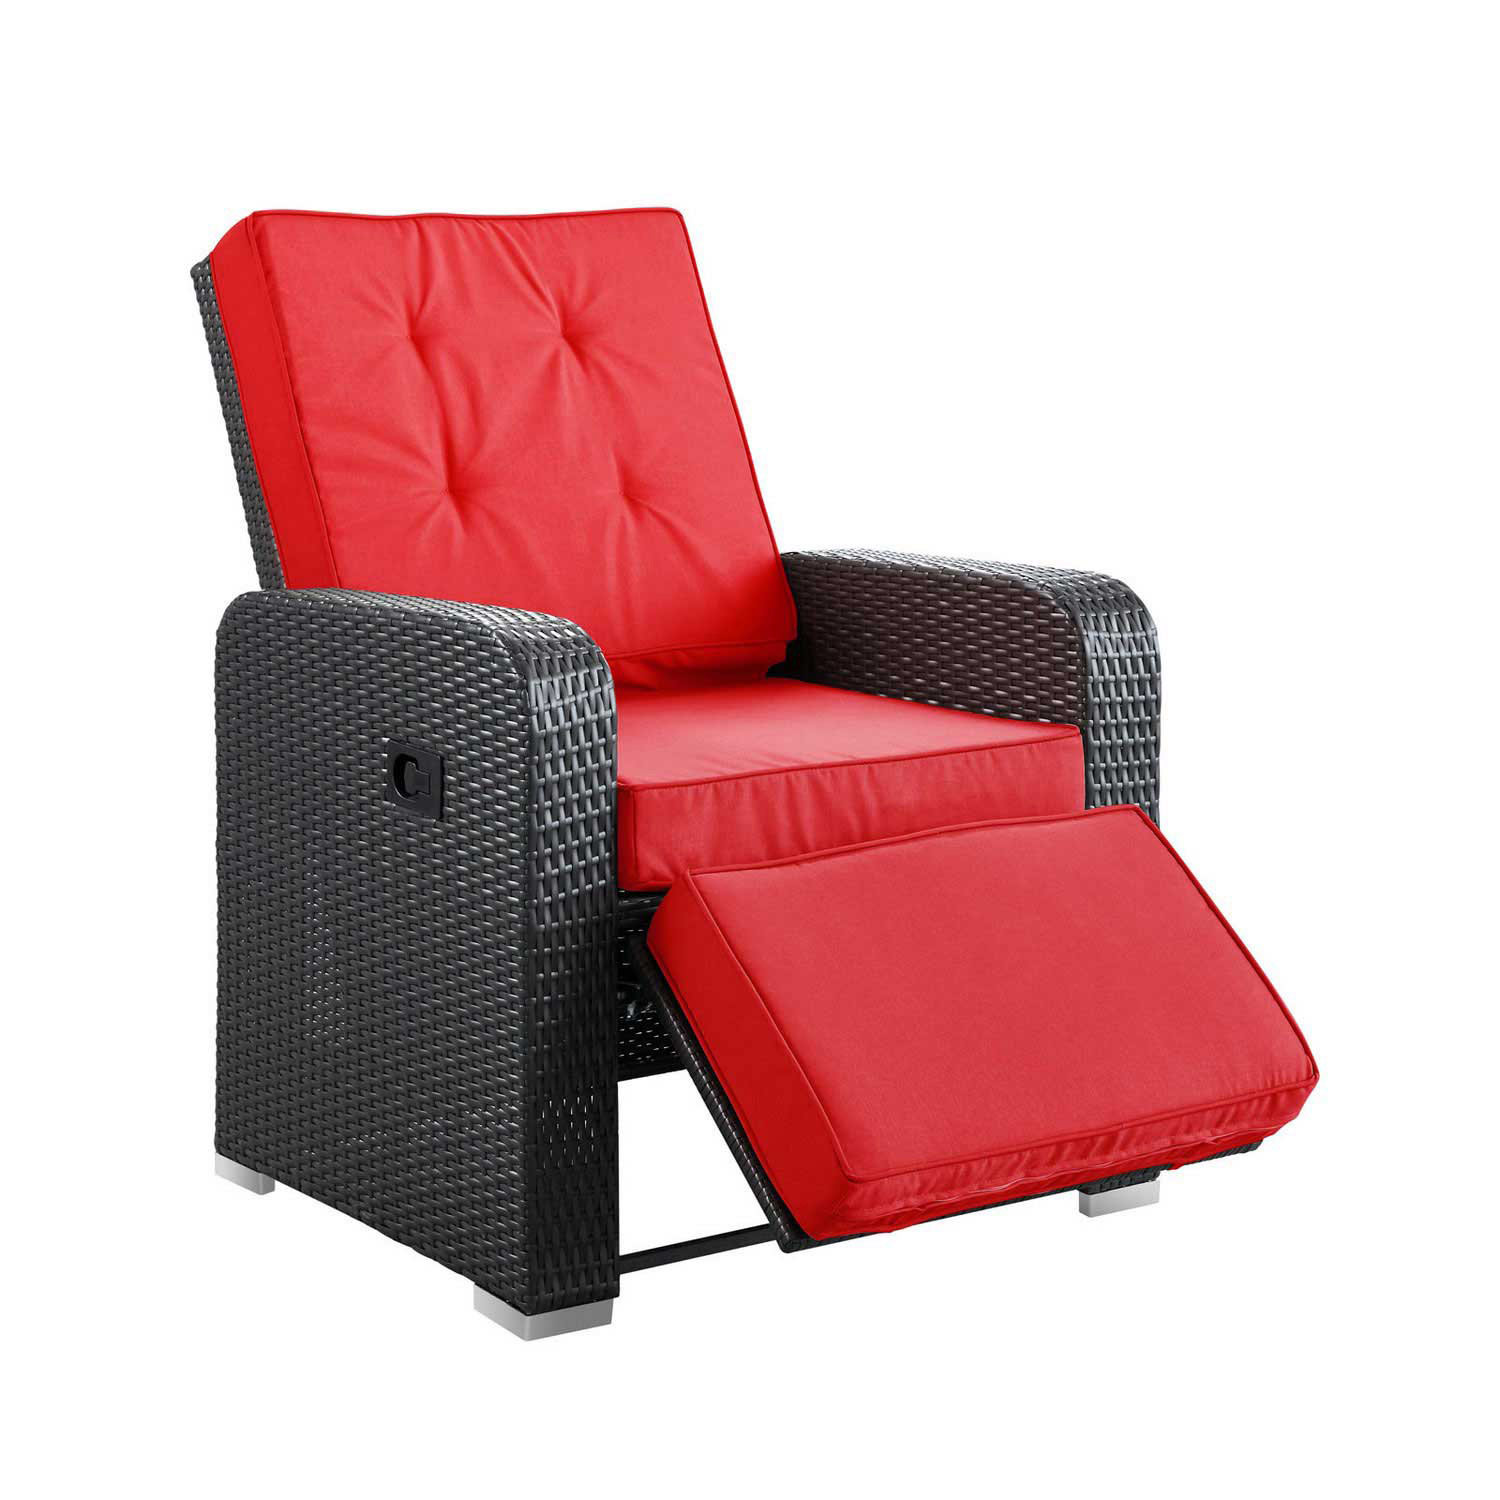 Modway Commence Patio Outdoor Patio Arm Chair Recliner - Espresso Red